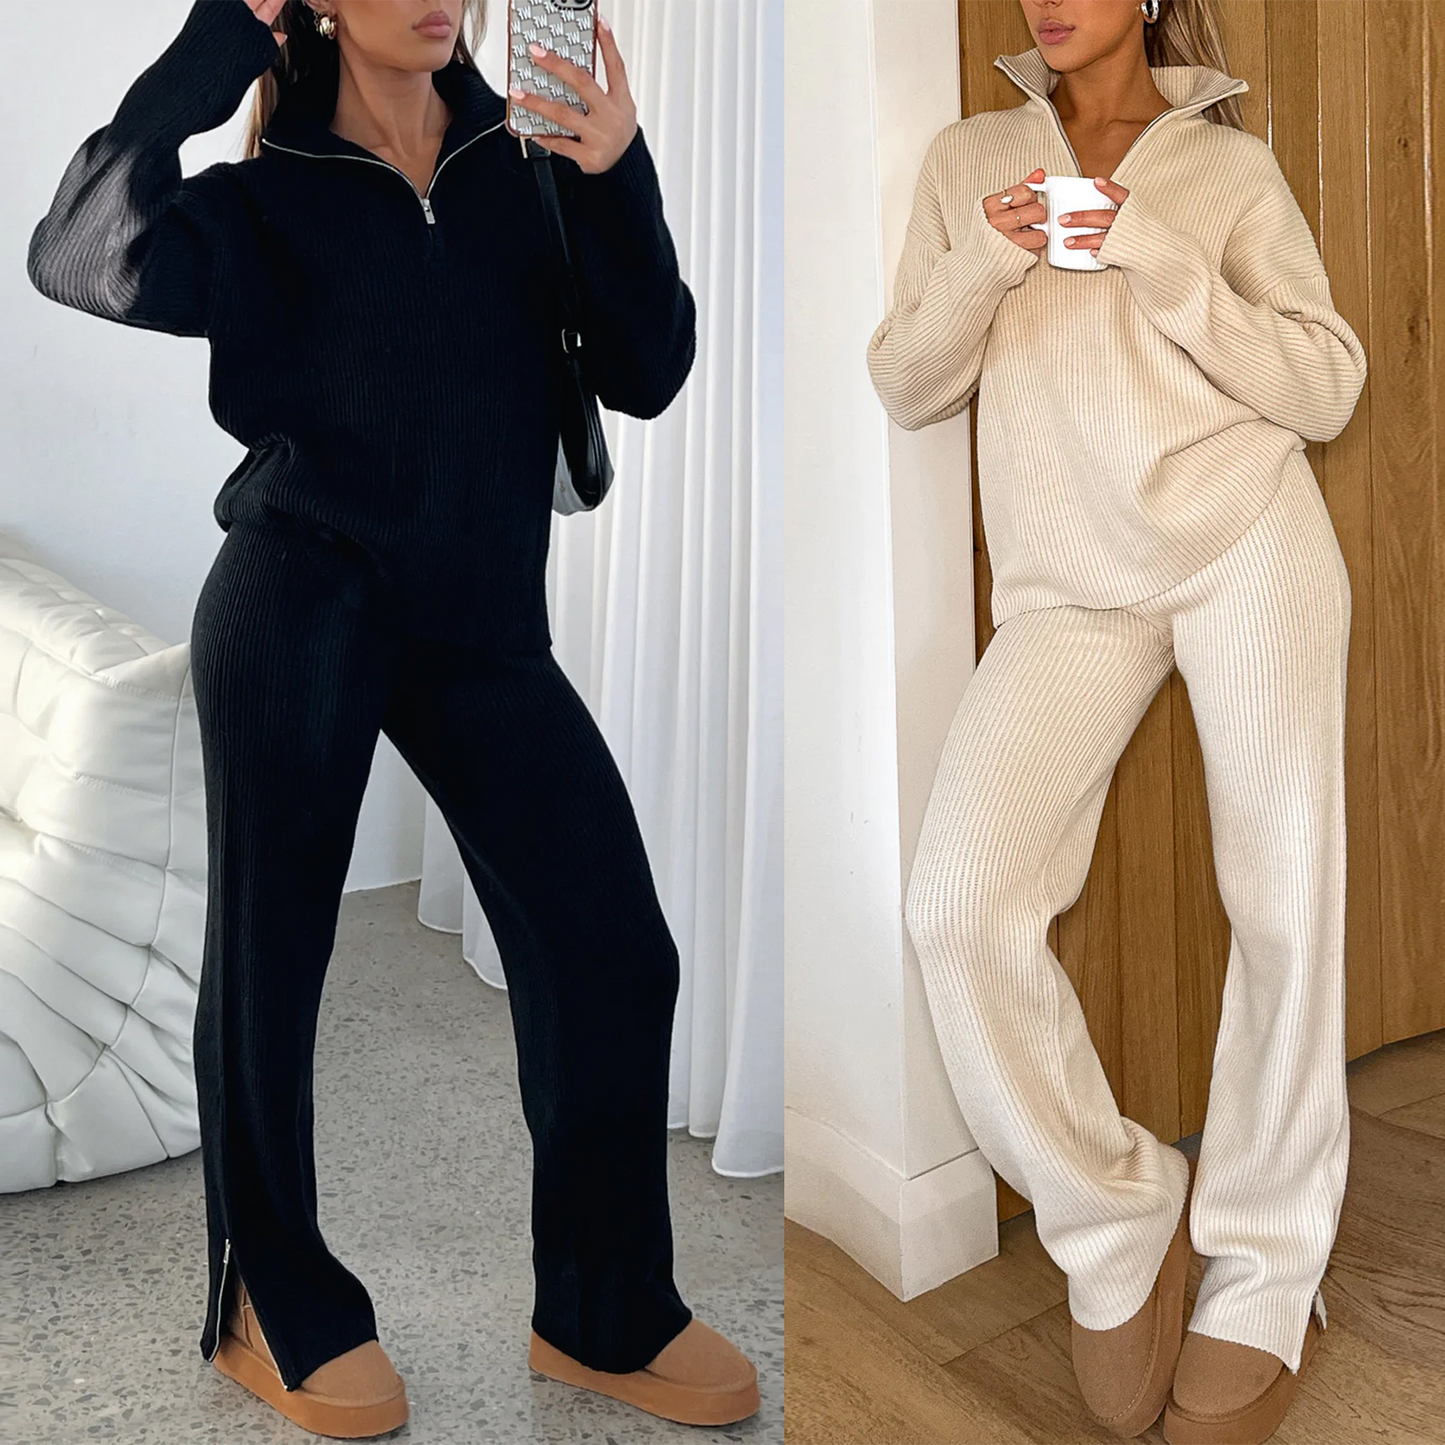 Ribbed Knitted Pants Suit